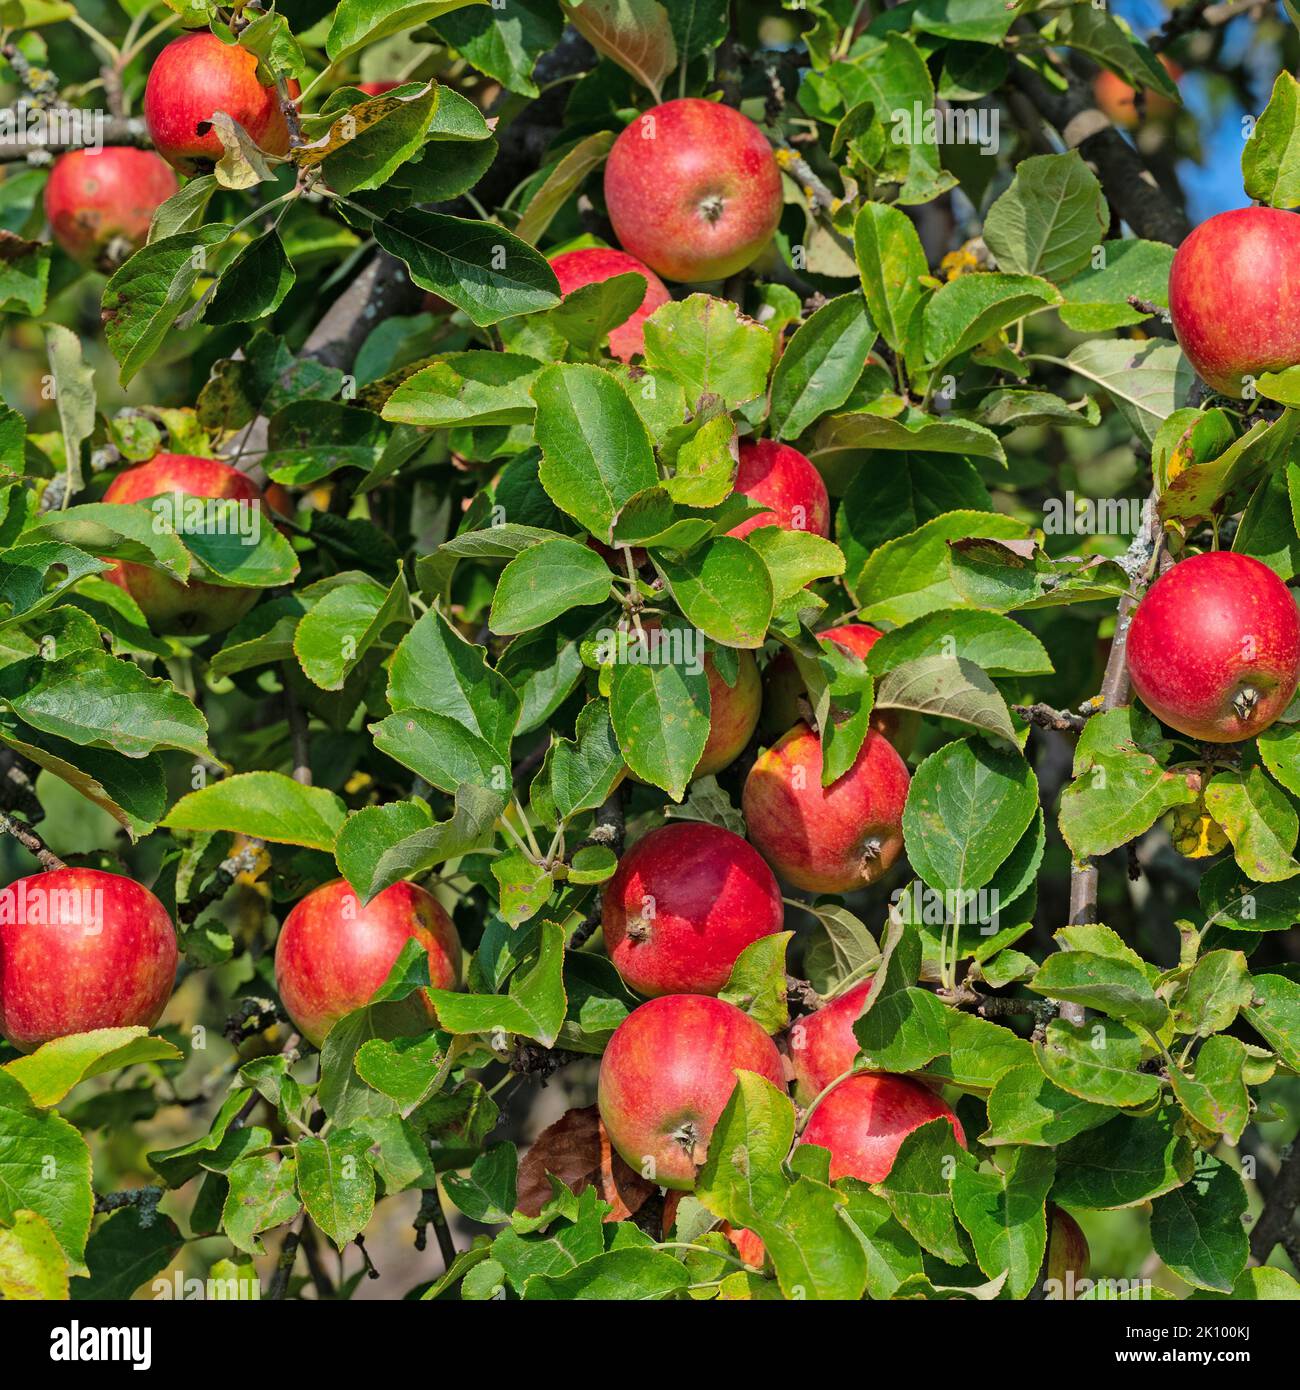 Ripe apples on the tree at harvest time Stock Photo